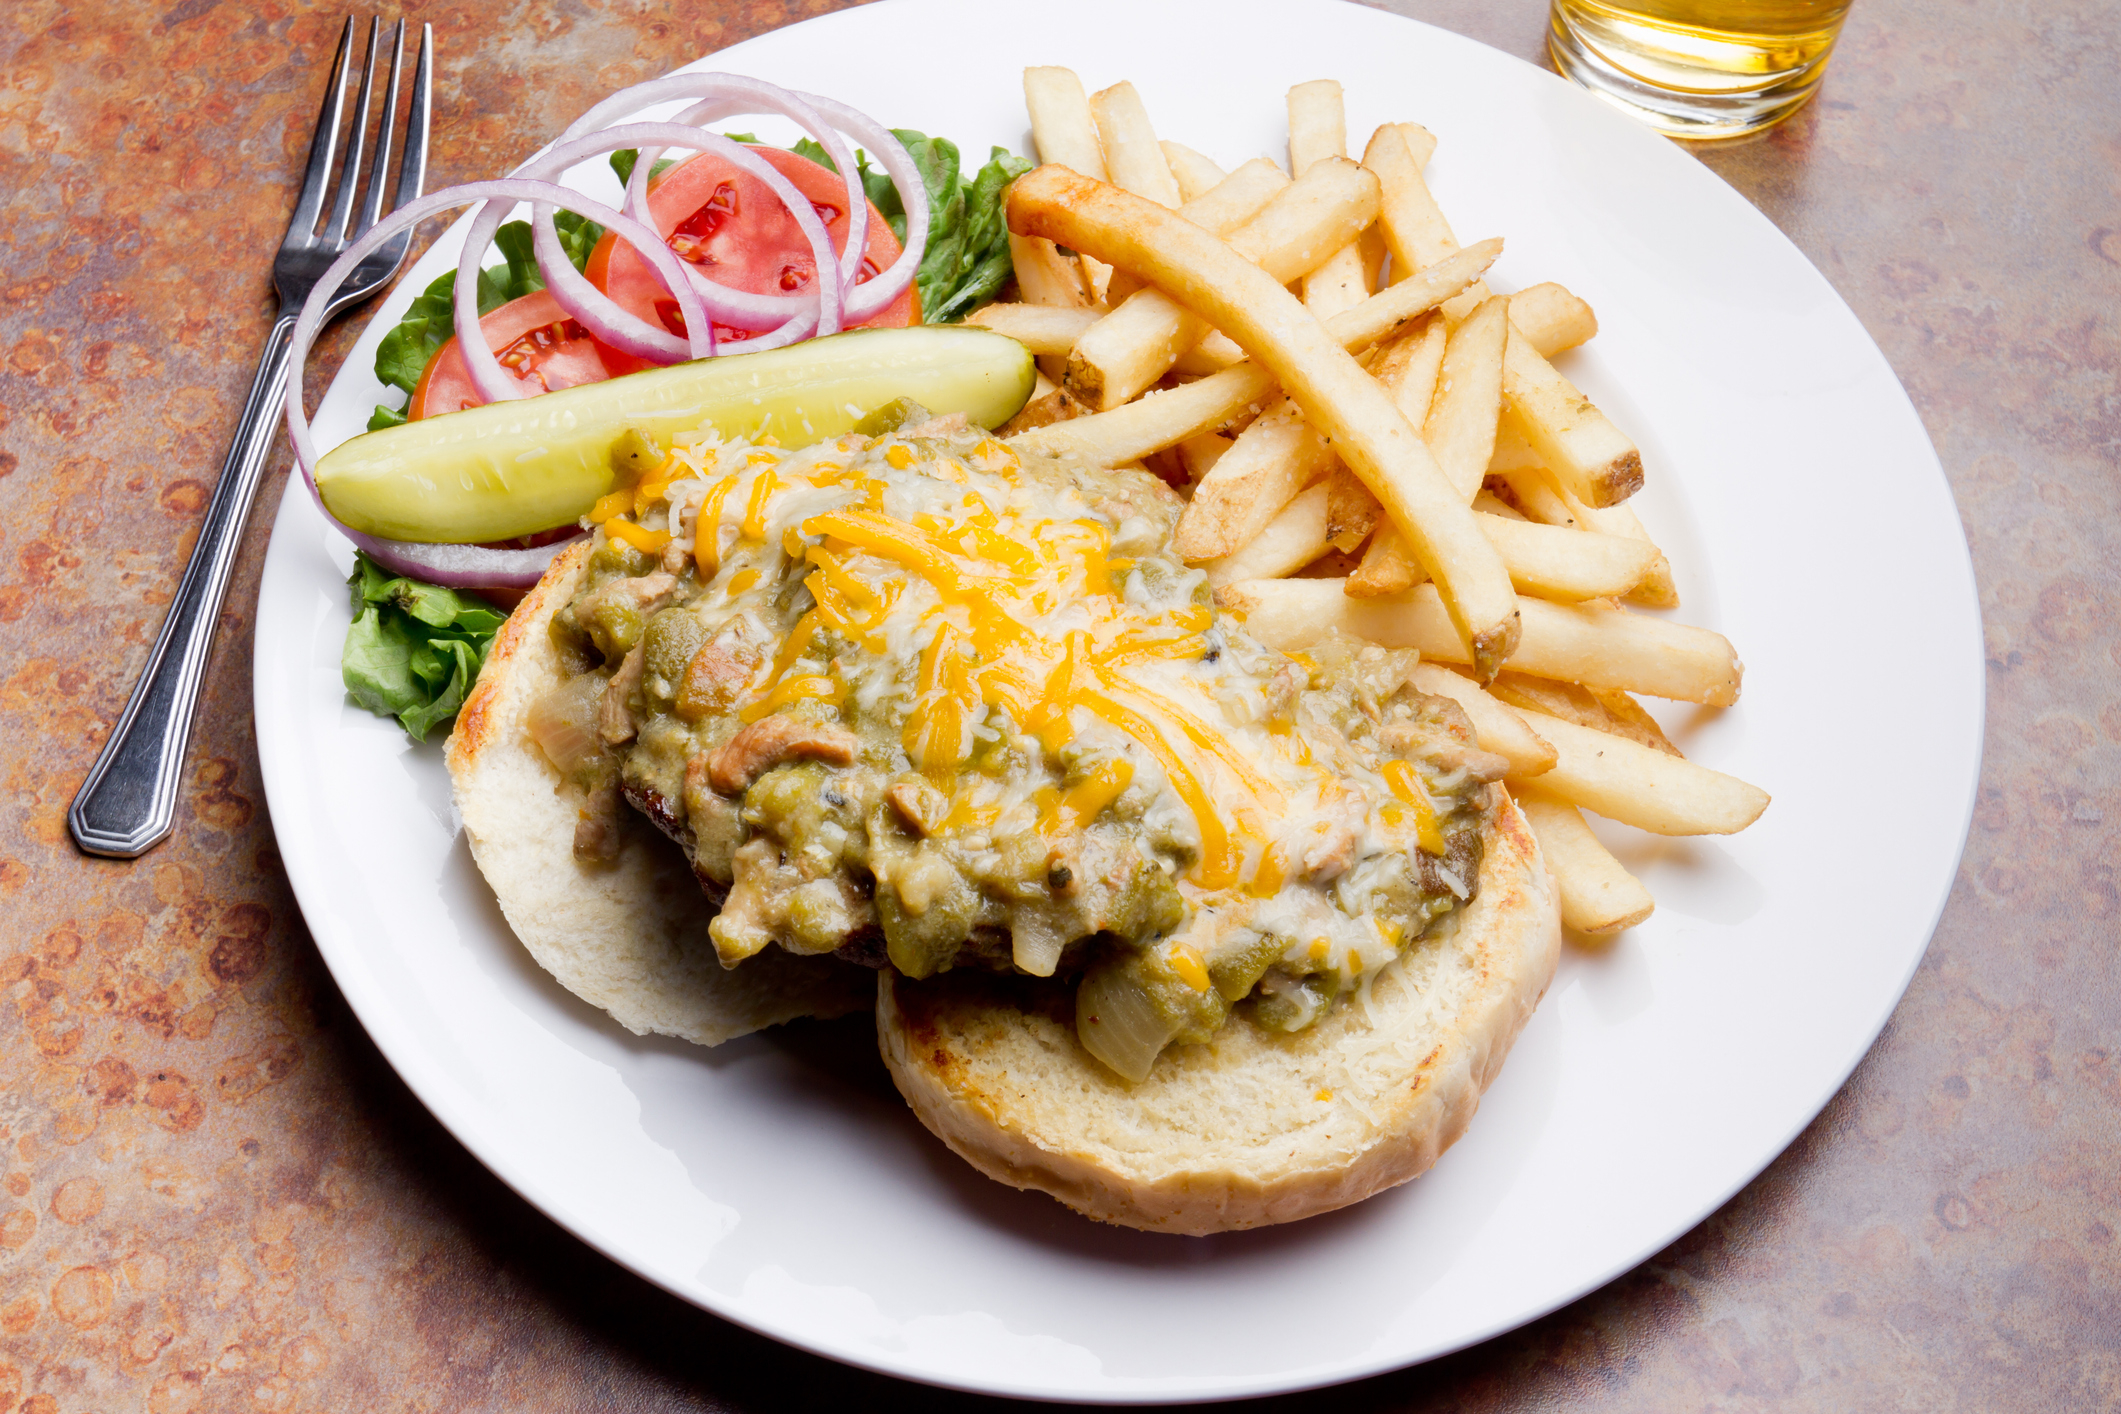 Open-faced cheeseburger with fries and salad on a plate, beside a glass of beverage